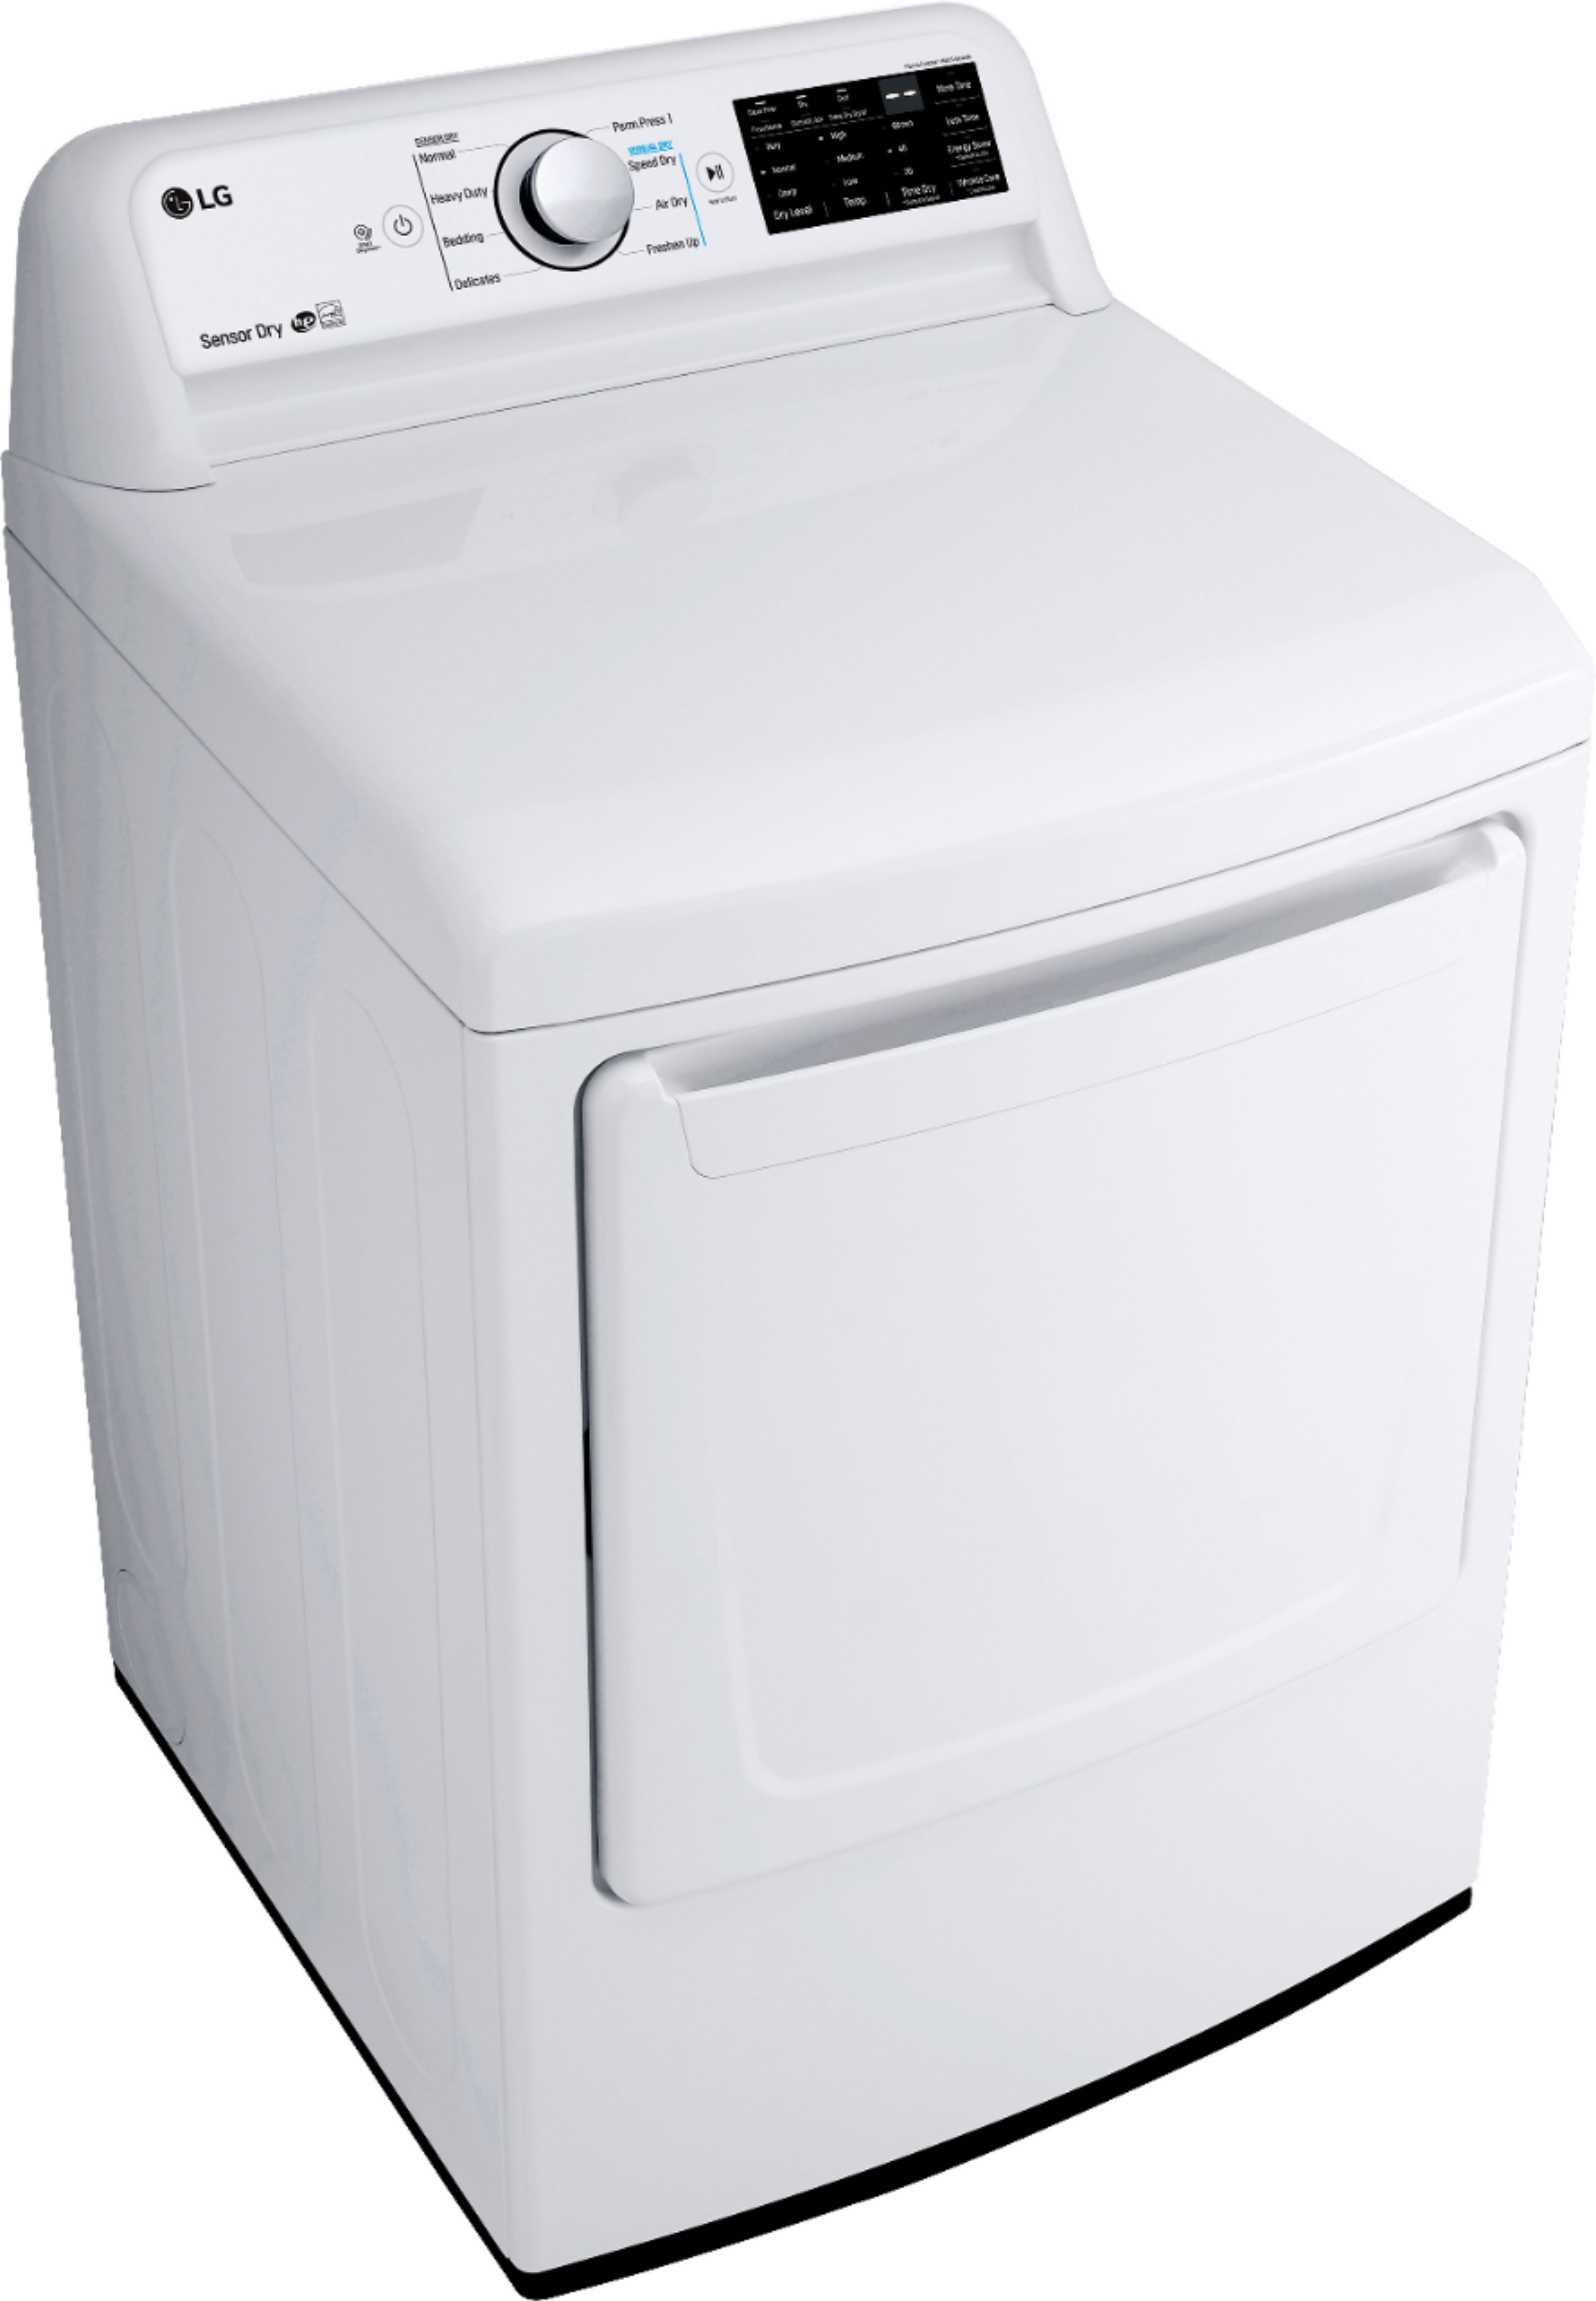 Angle View: Bosch - Laundry Stacking Kit - White